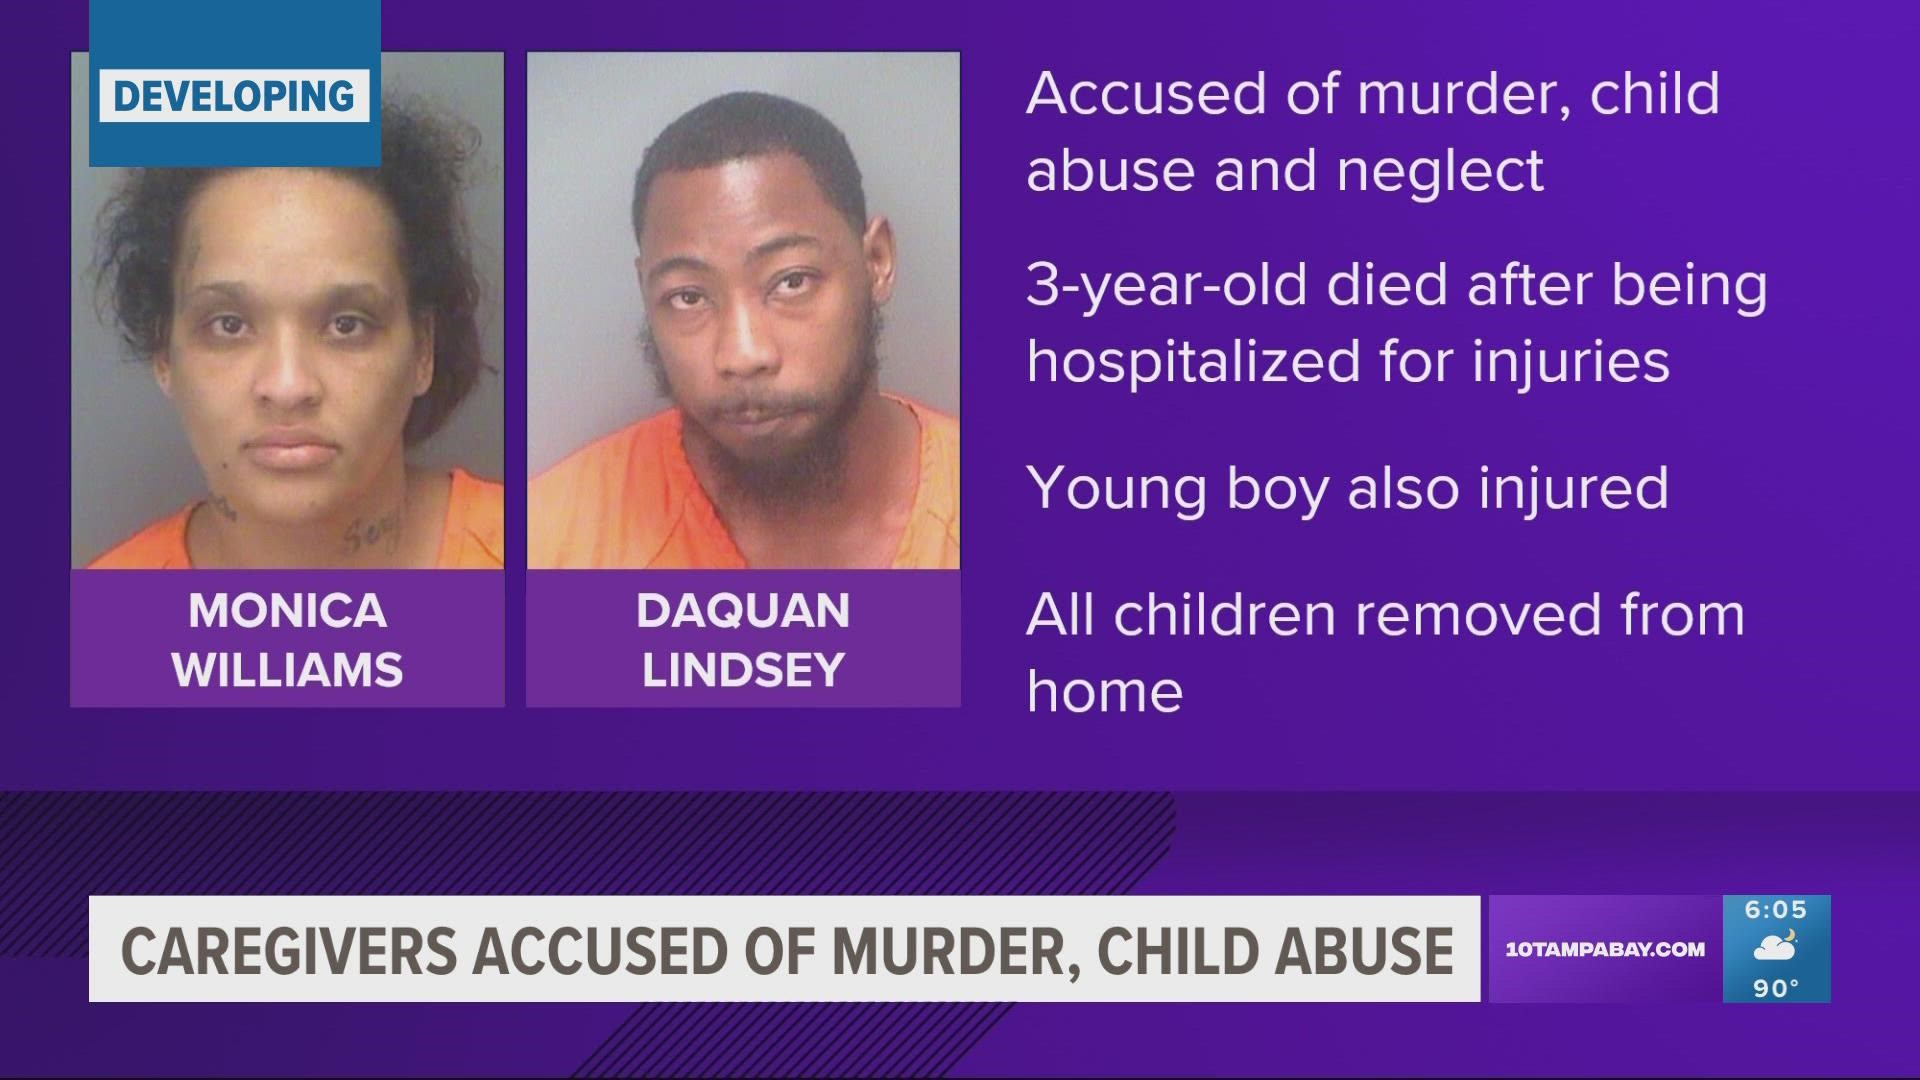 Authorities say Monica Williams, 33, and Daquan Lindsey, 25 were the caregivers of Brandy Crews.